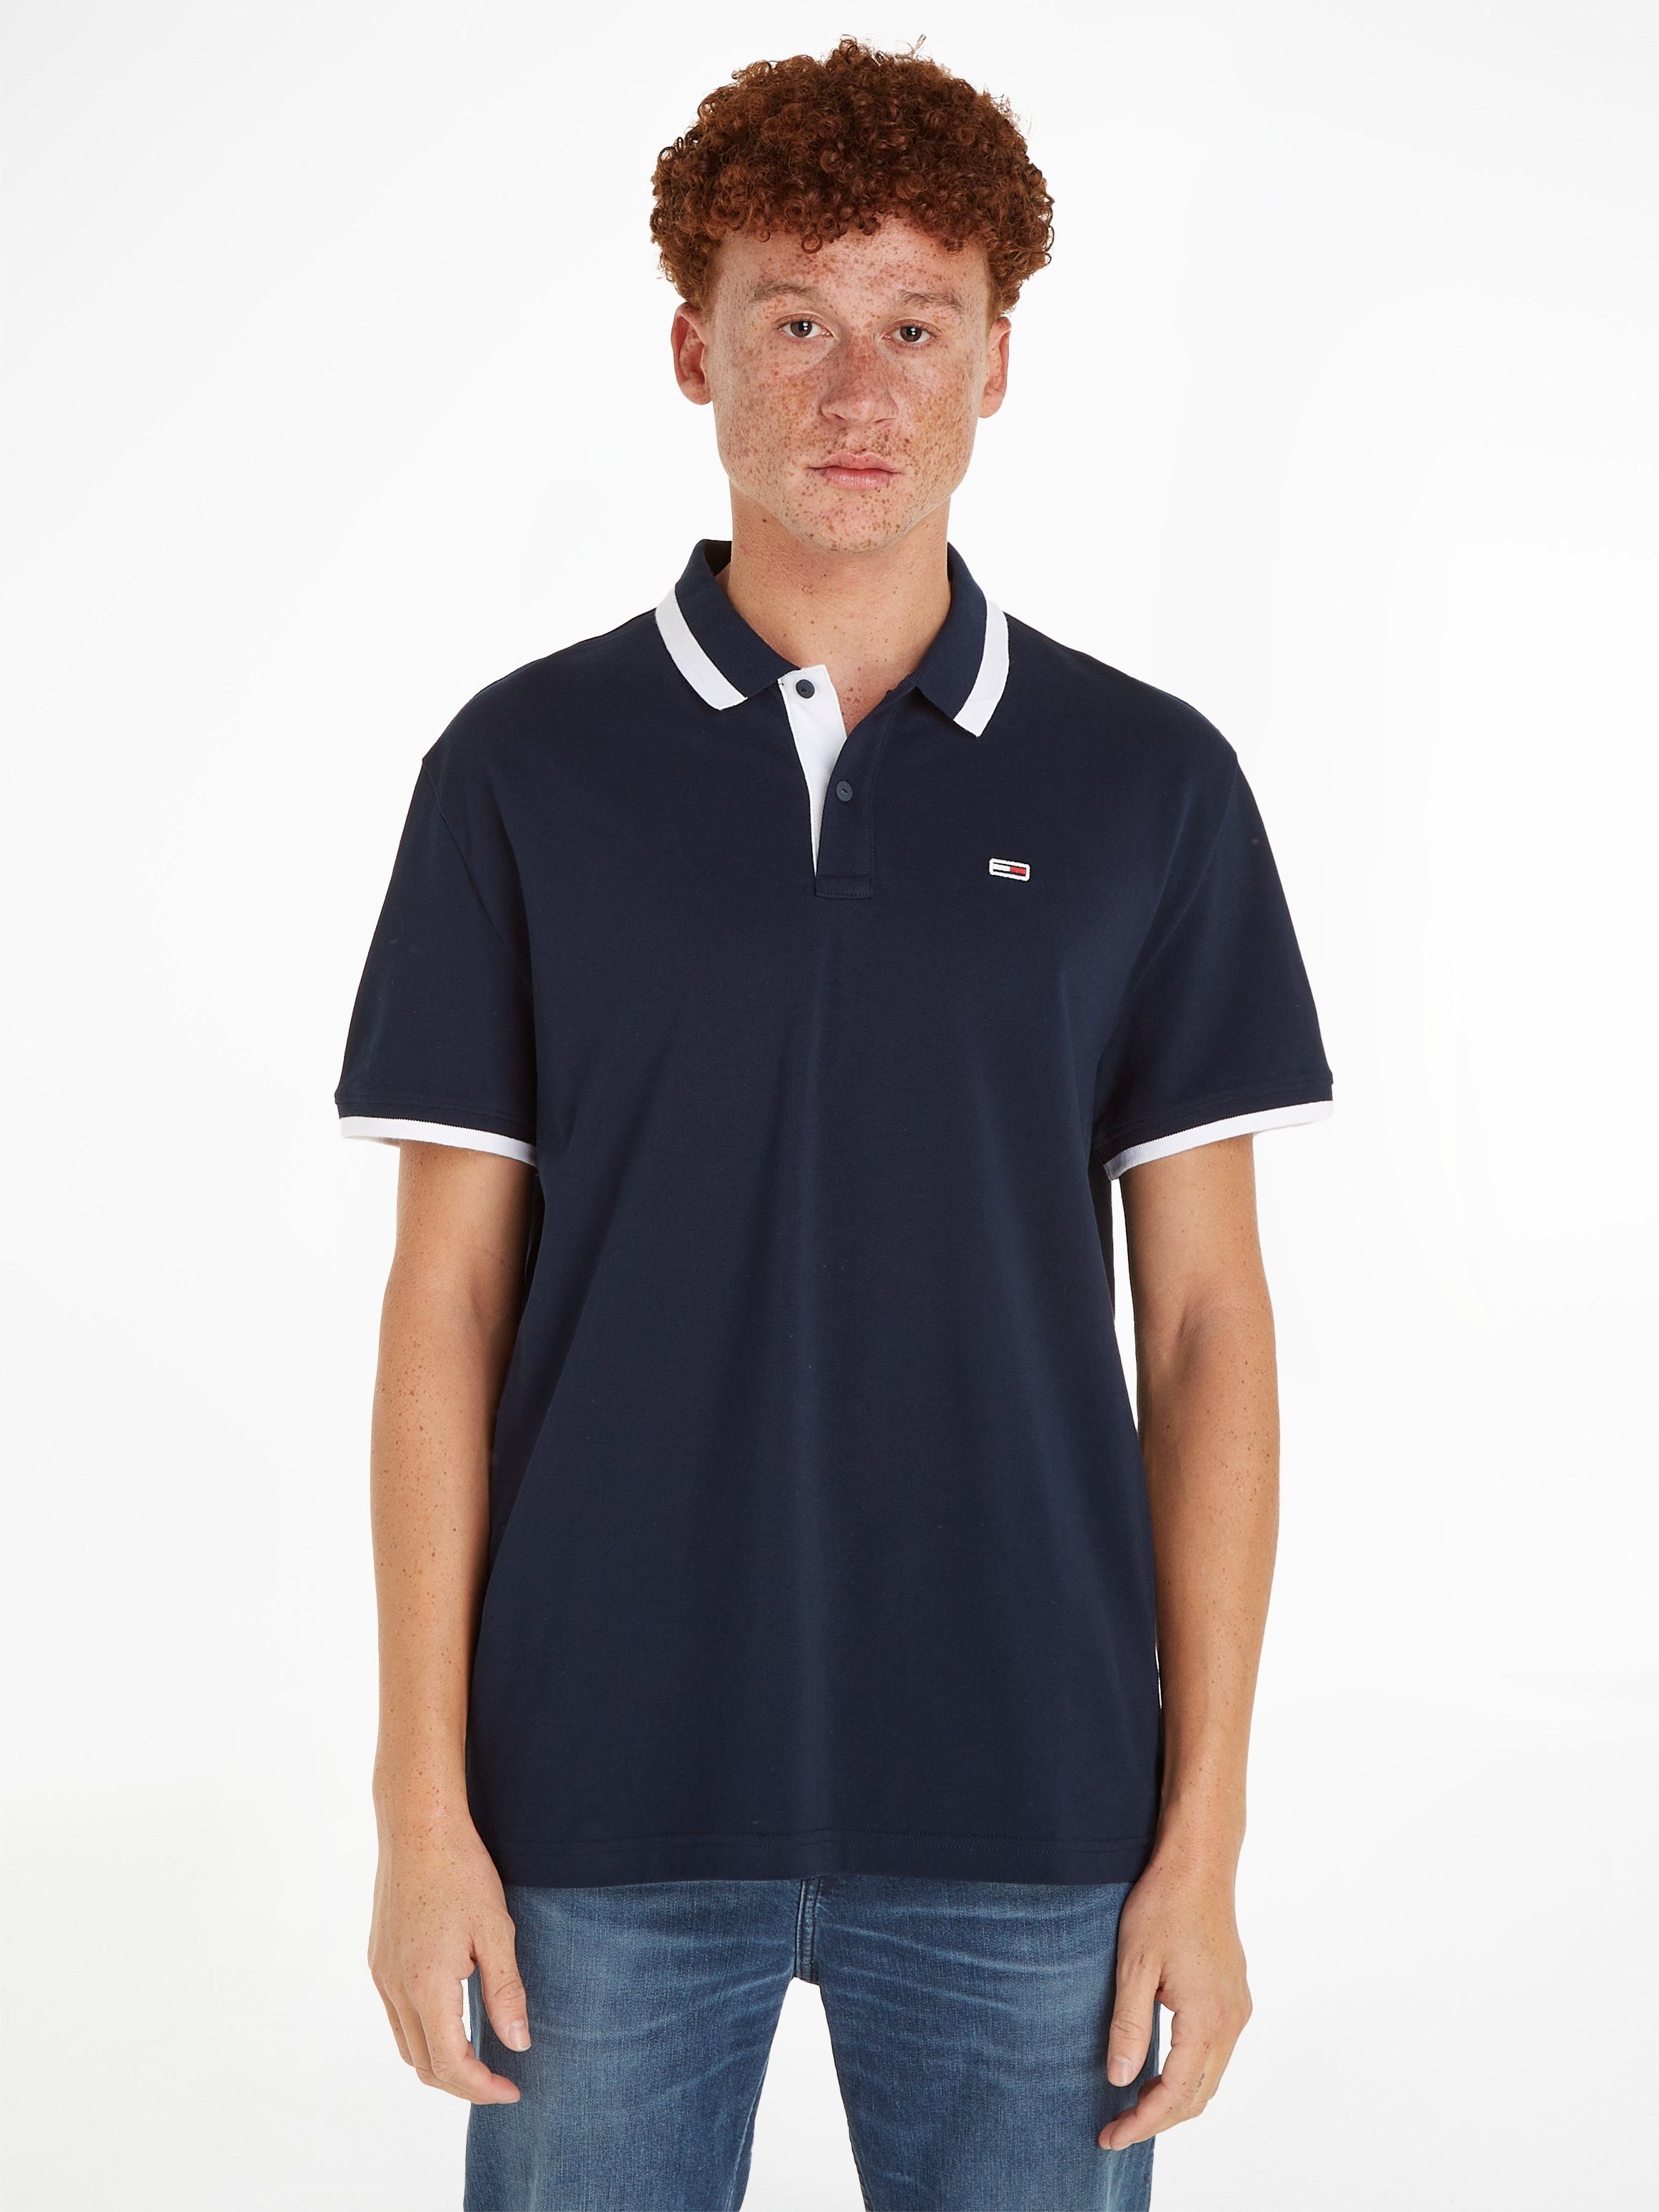 SOLID TJM Jeans Poloshirt TIPPED Polokragen mit POLO REG Tommy